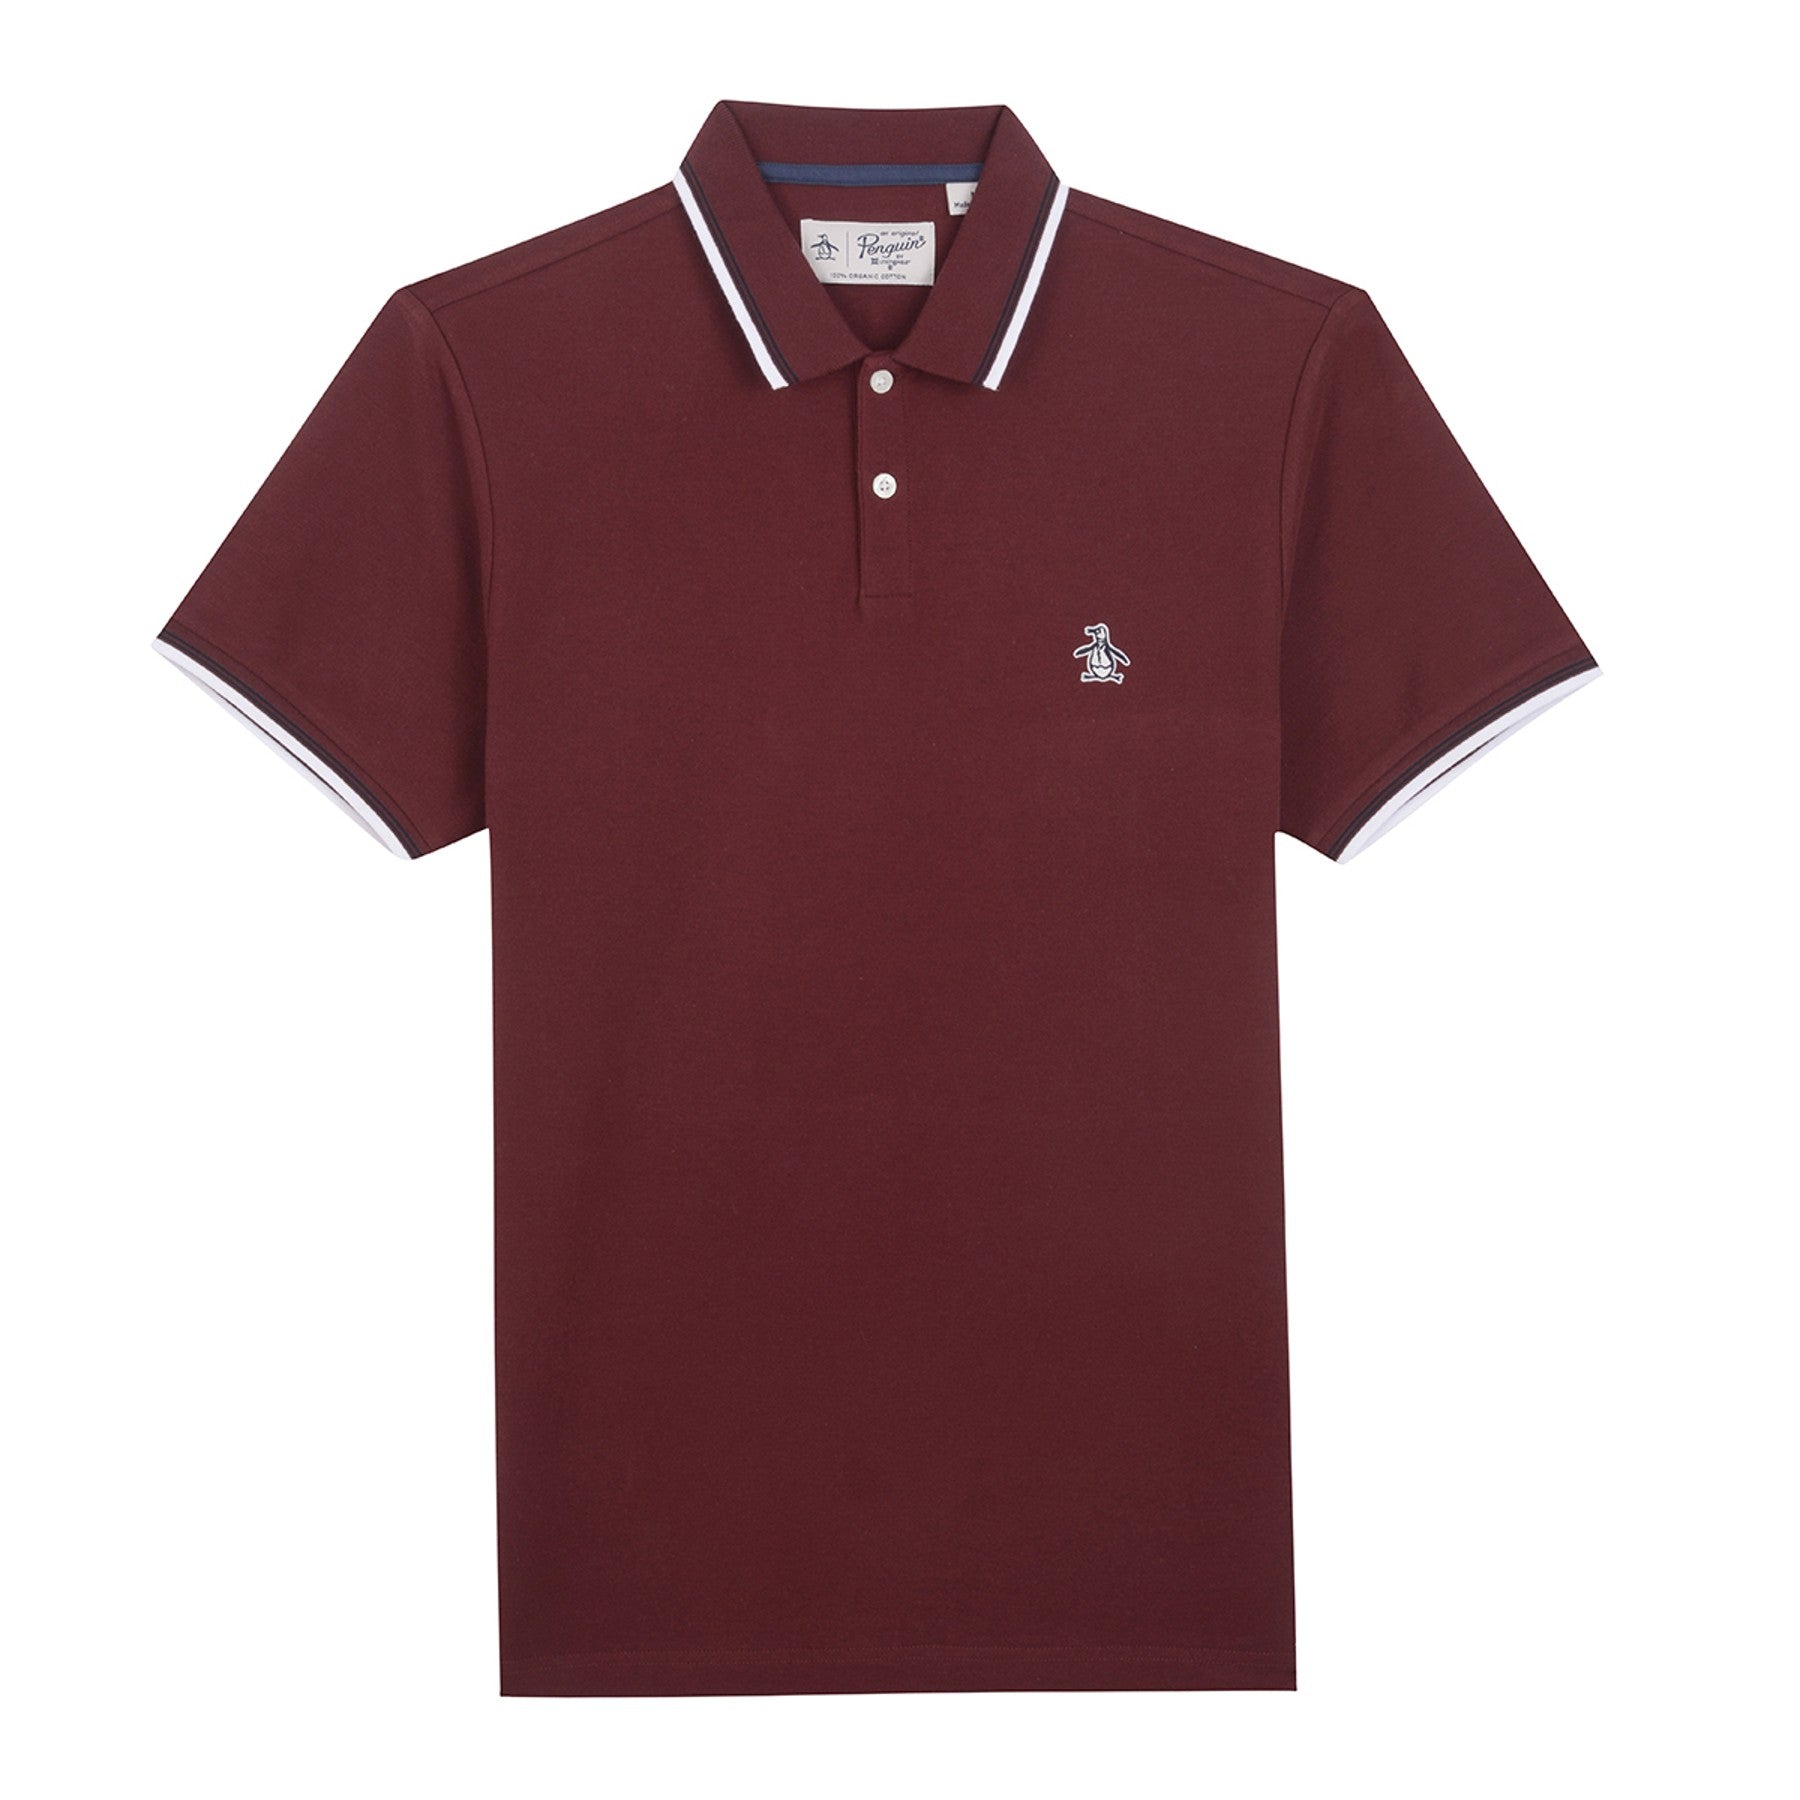 View Sticker Pete Organic Cotton Polo Shirt In Tawny Port information